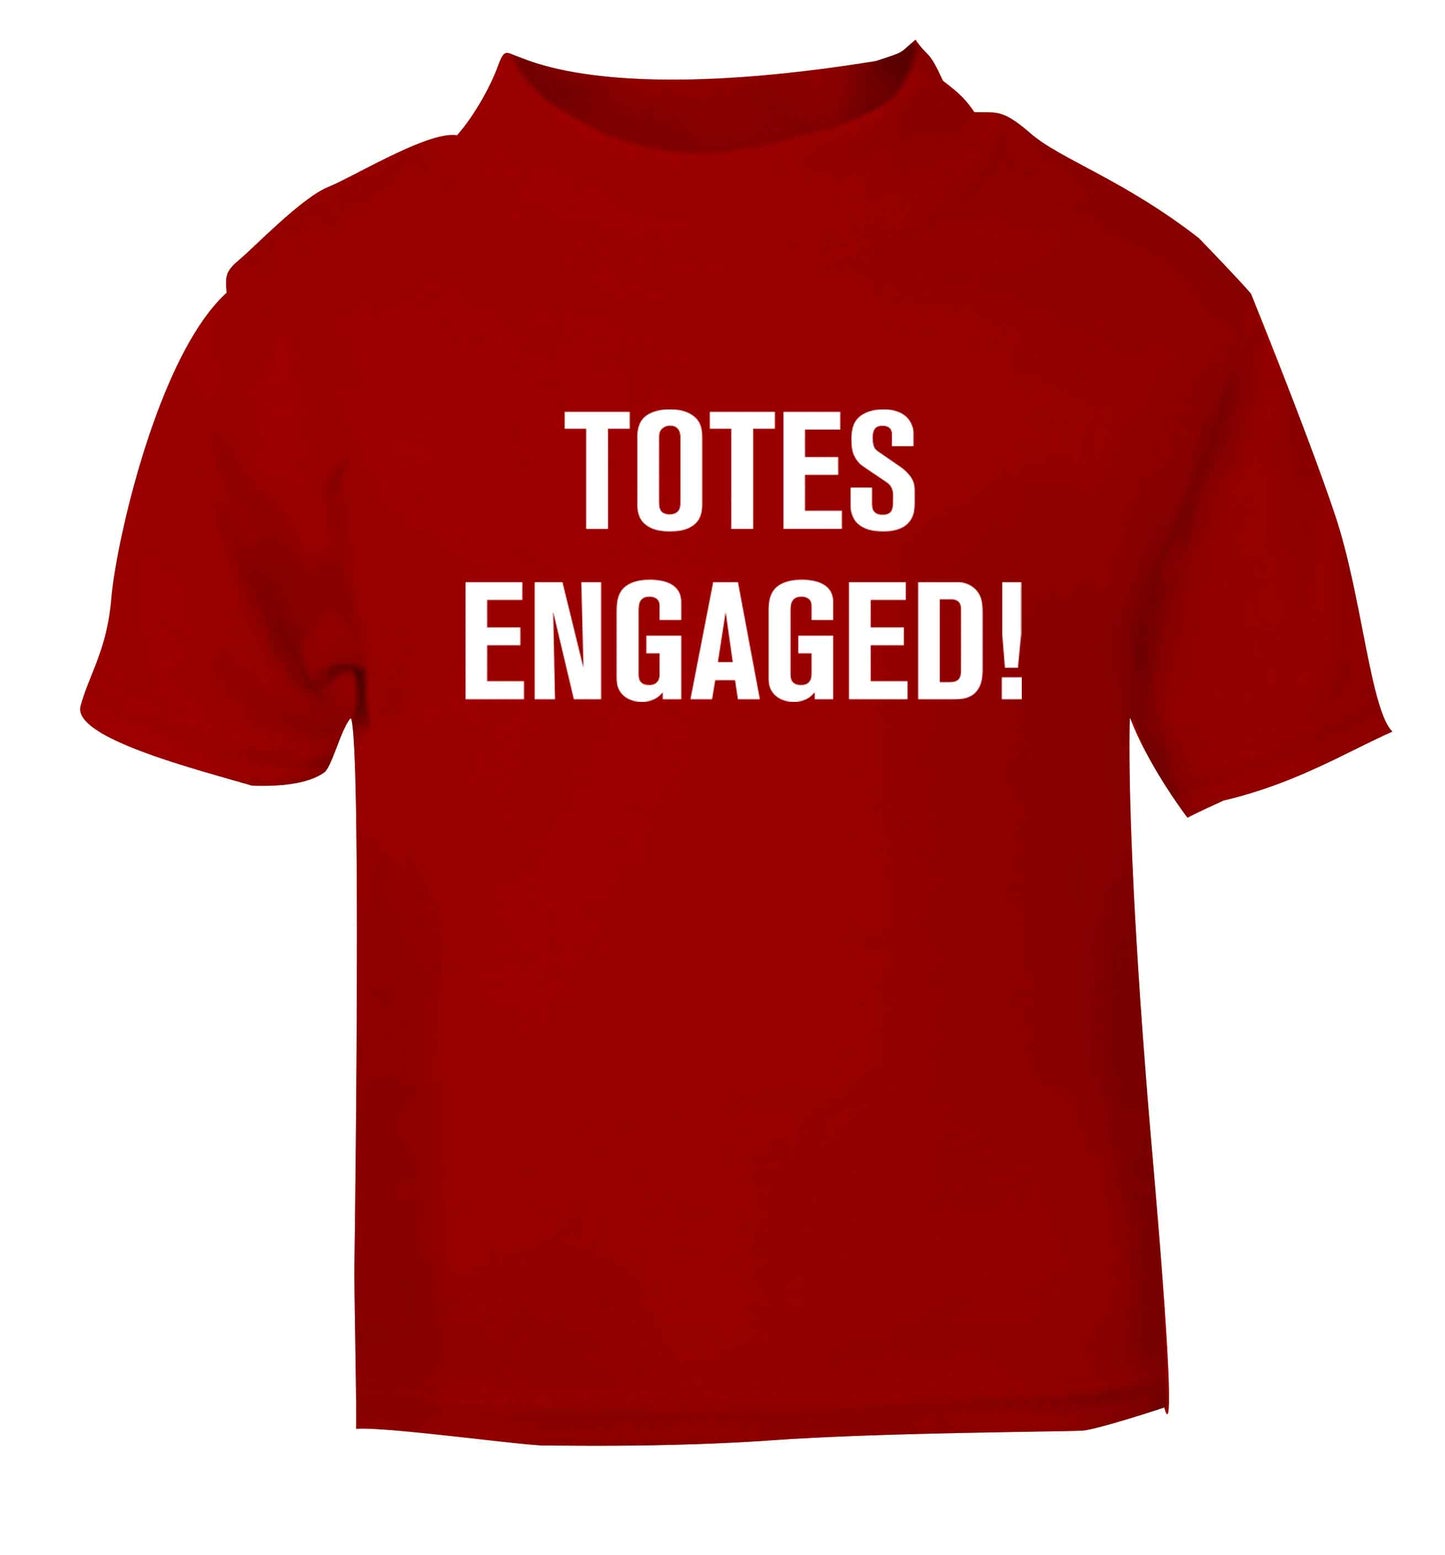 Totes engaged red baby toddler Tshirt 2 Years